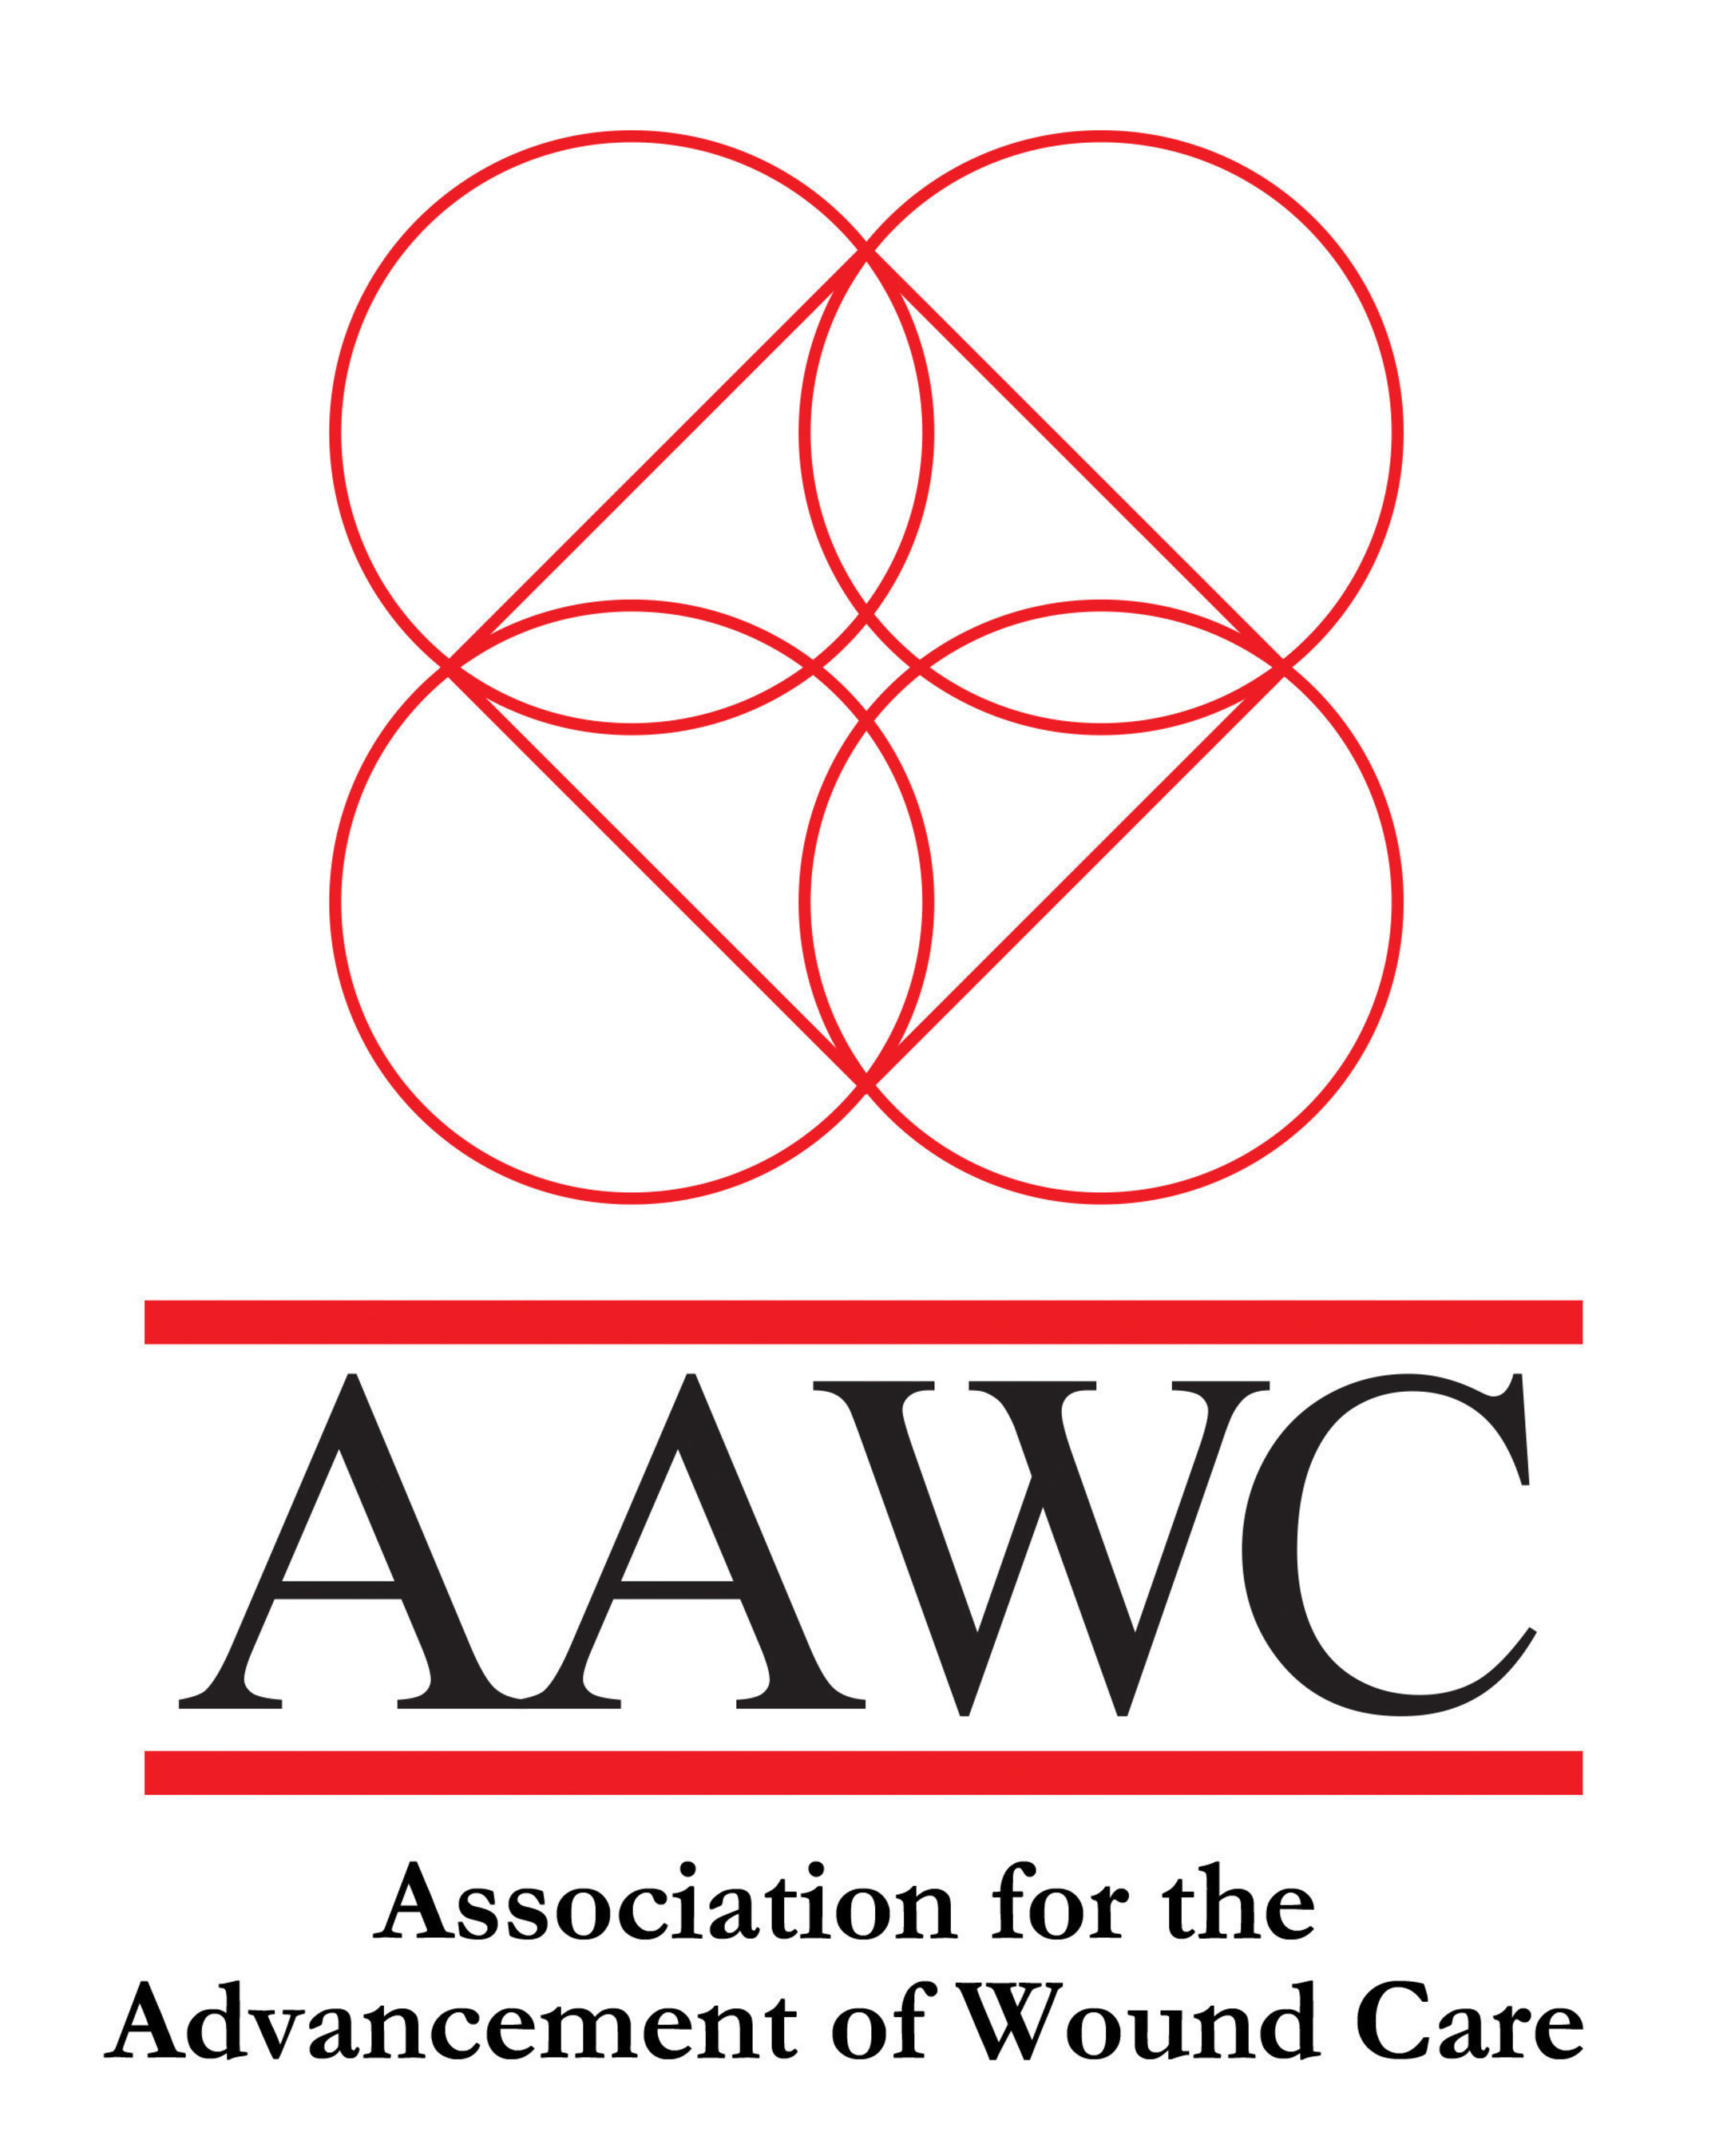 AAWC is the leading, nonprofit organization in the United States dedicated to interdisciplinary wound healing and tissue preservation. With a mission to advance the care of people with and at risk for wounds, AAWC offers membership to everyone involved in wound care - clinicians, researchers, educators and other healthcare professionals; patients and lay-caregivers; clinics, hospitals and other healthcare facilities; corporations and manufacturers; students and retirees; and advocates. (PRNewsFoto/AAWC)